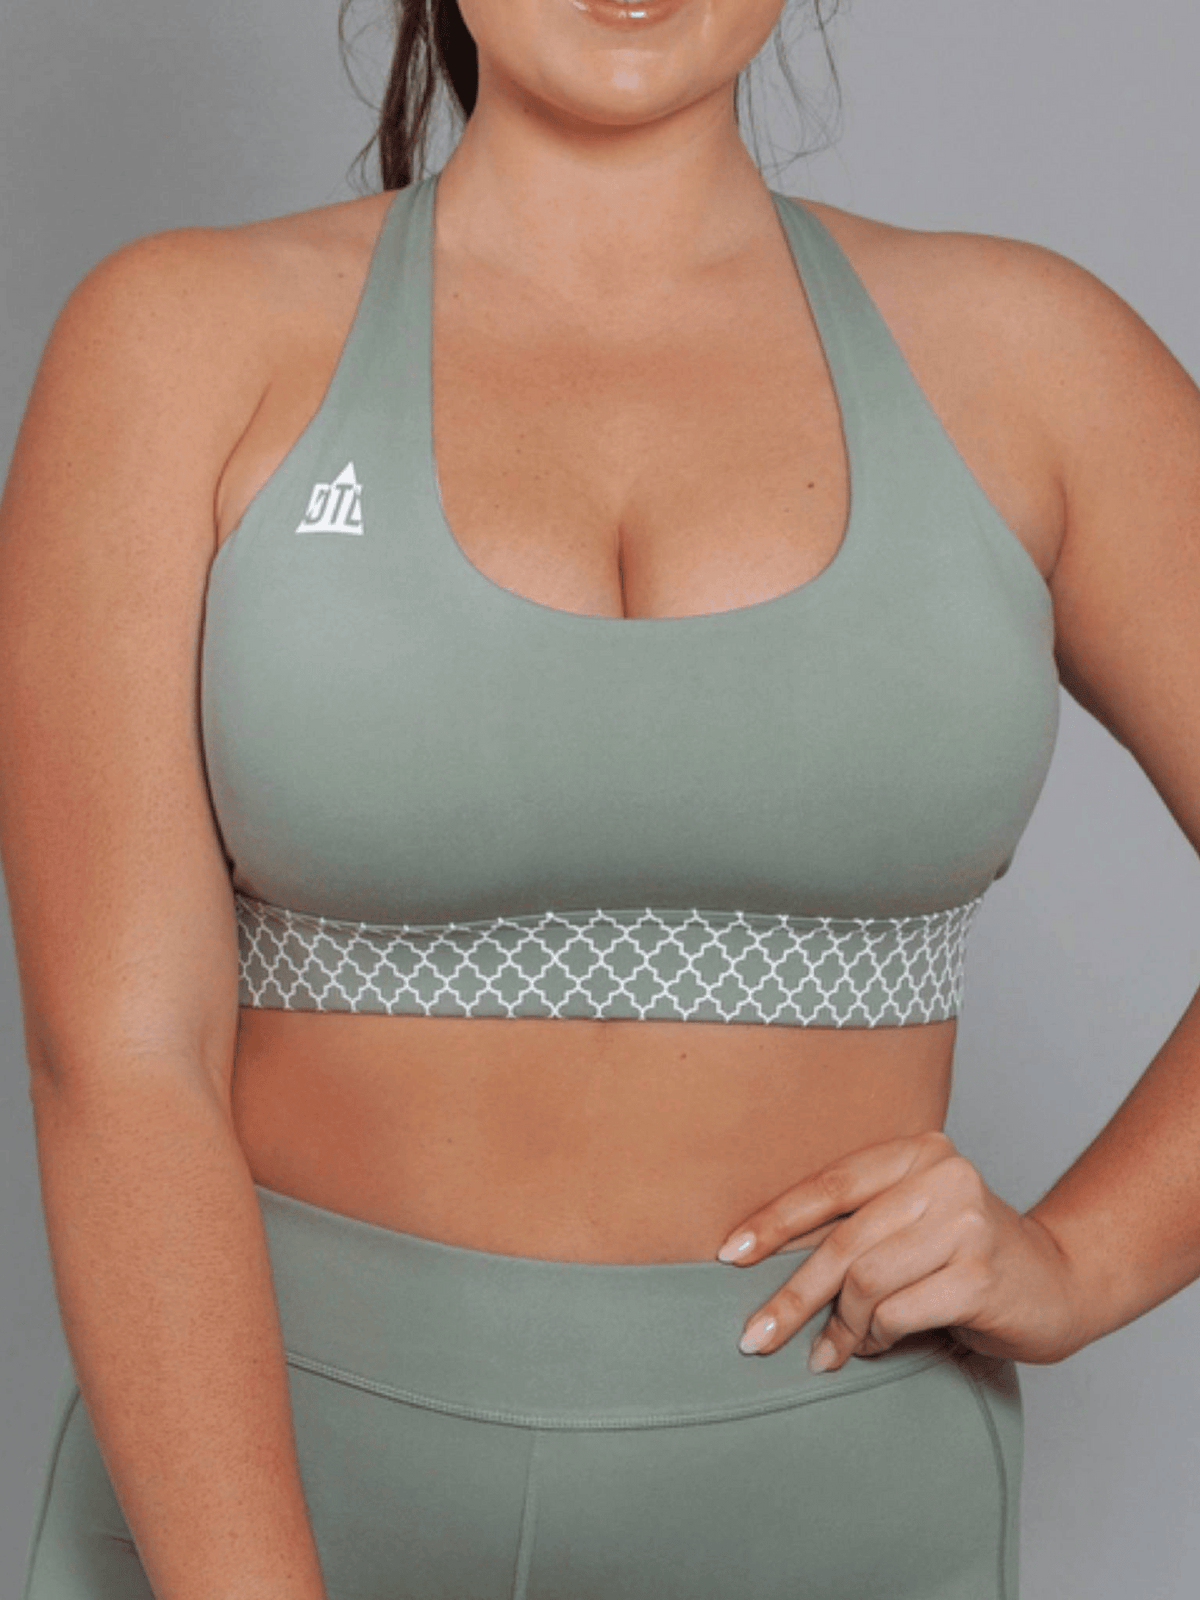 Shoppers in Their 60s Love This Sweat-Resistant Bra